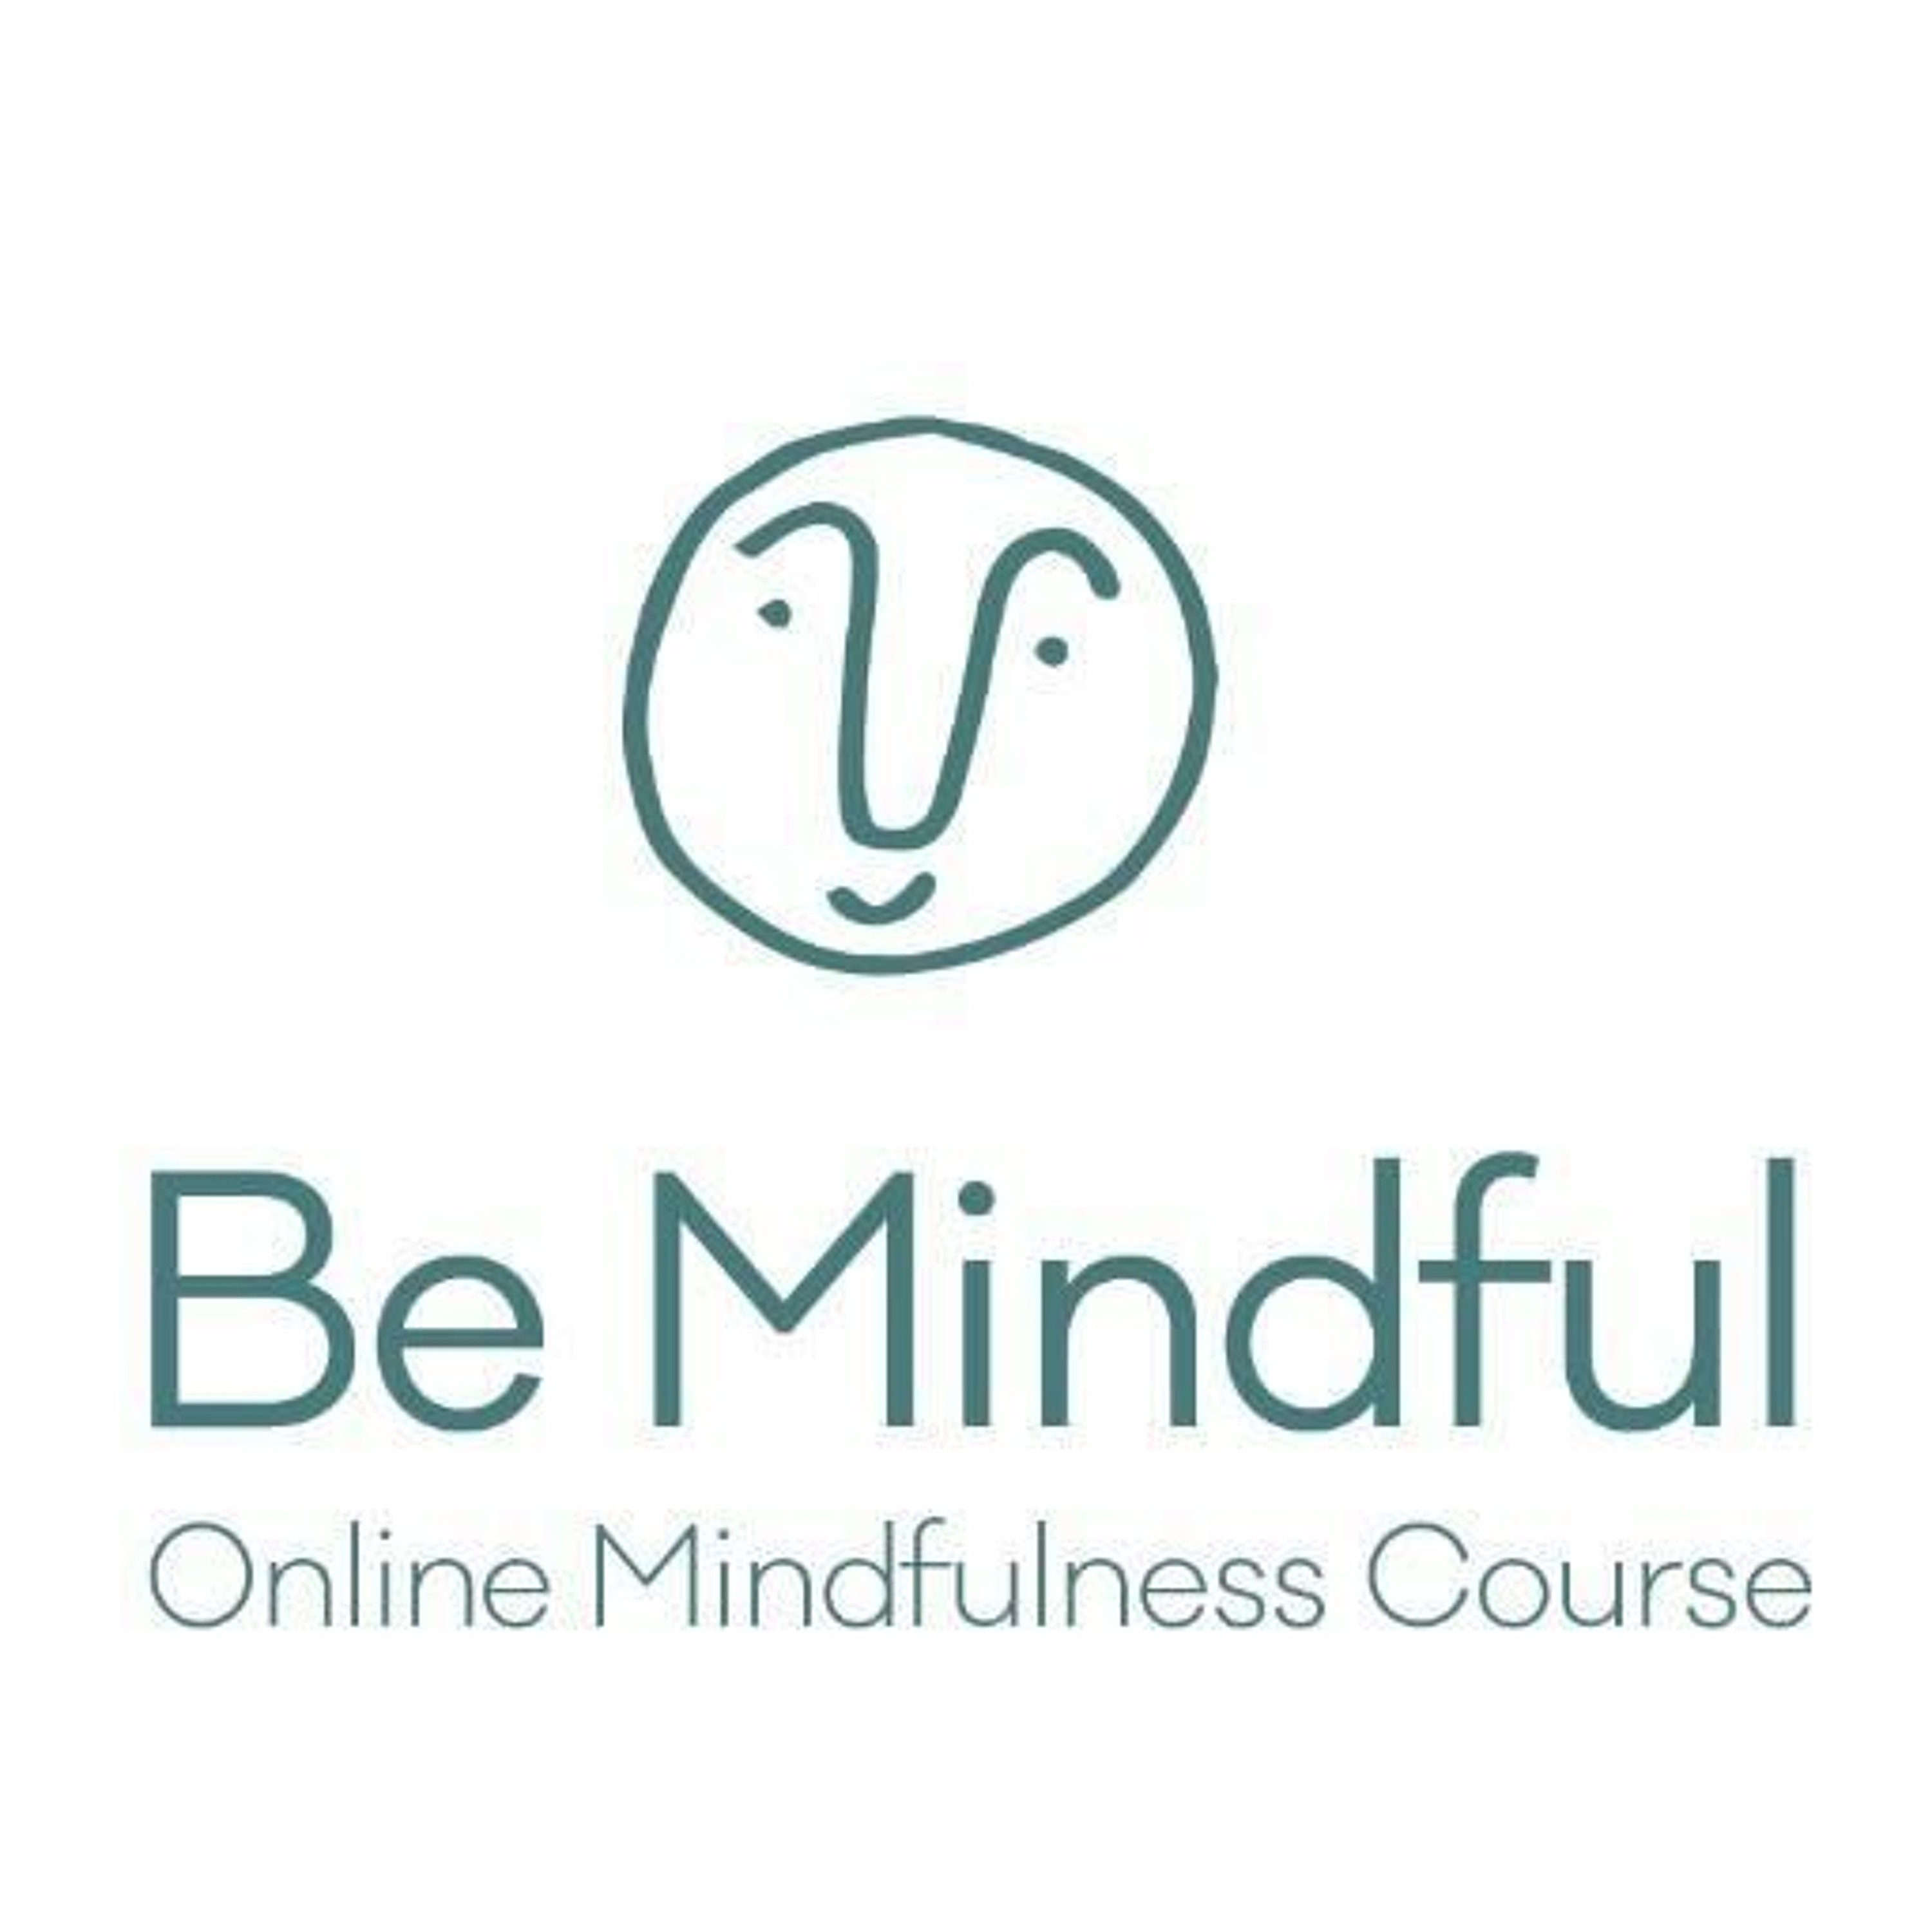 Let's Talk: Mental Health - Three-minute mindfulness breathing space